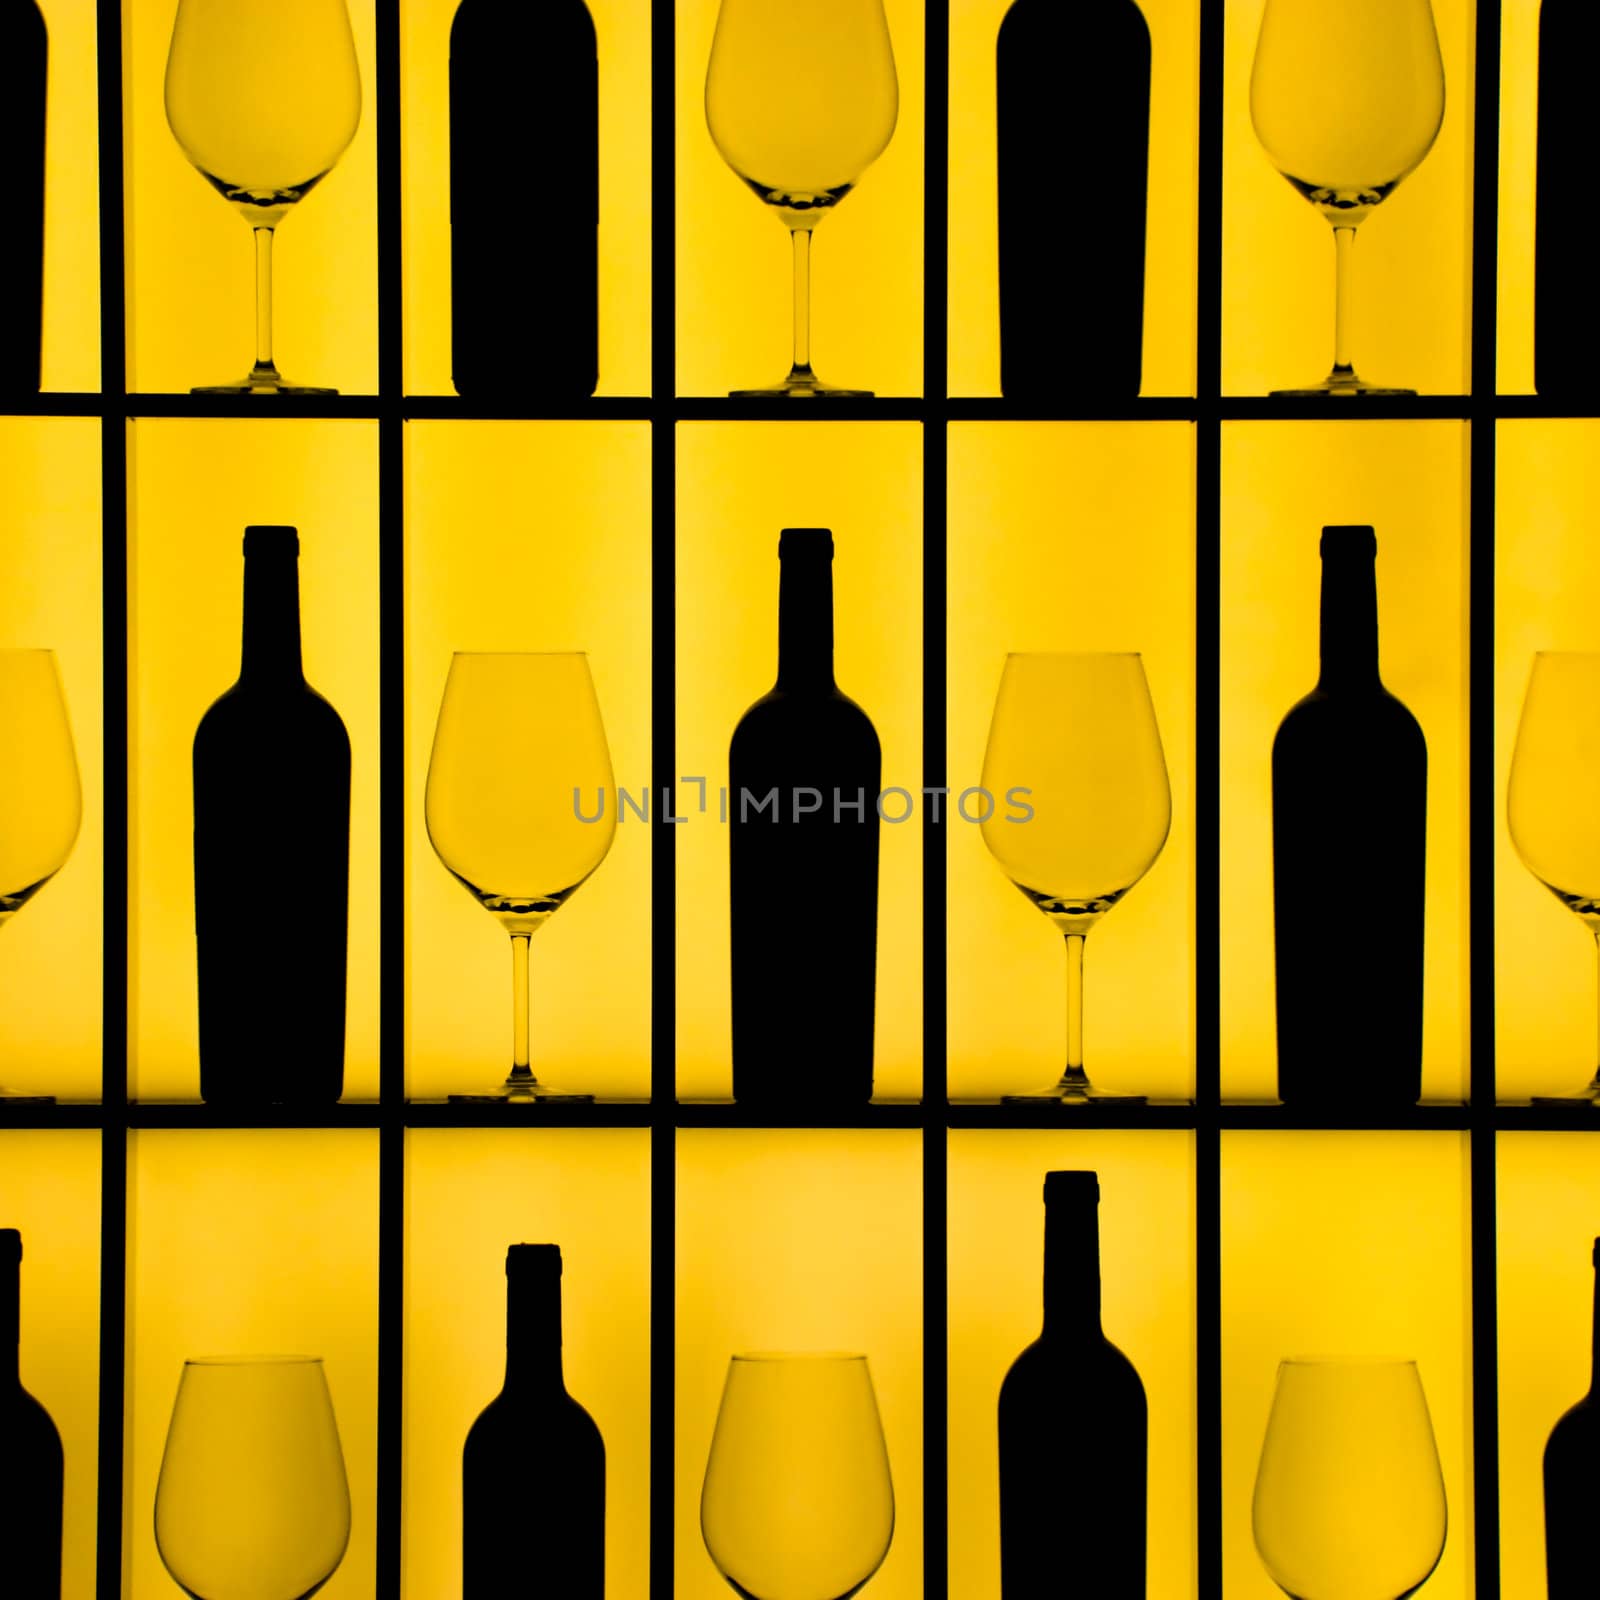 Bottles and glasses by 300pixel